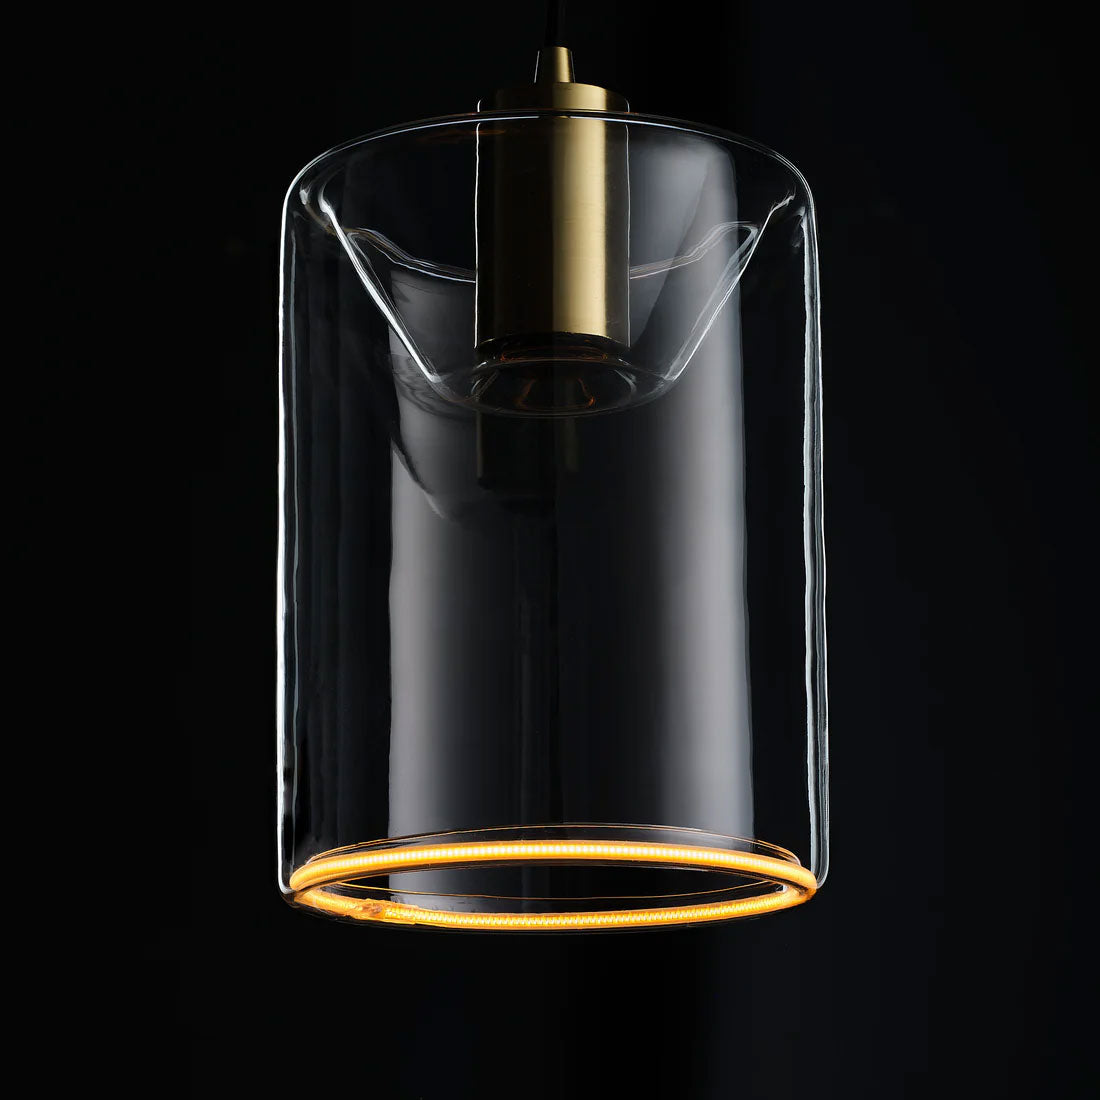 The Azure Cylinder is a large glass pendant light bulb made by Well Lit and sold by South Charlotte Fine Lighting